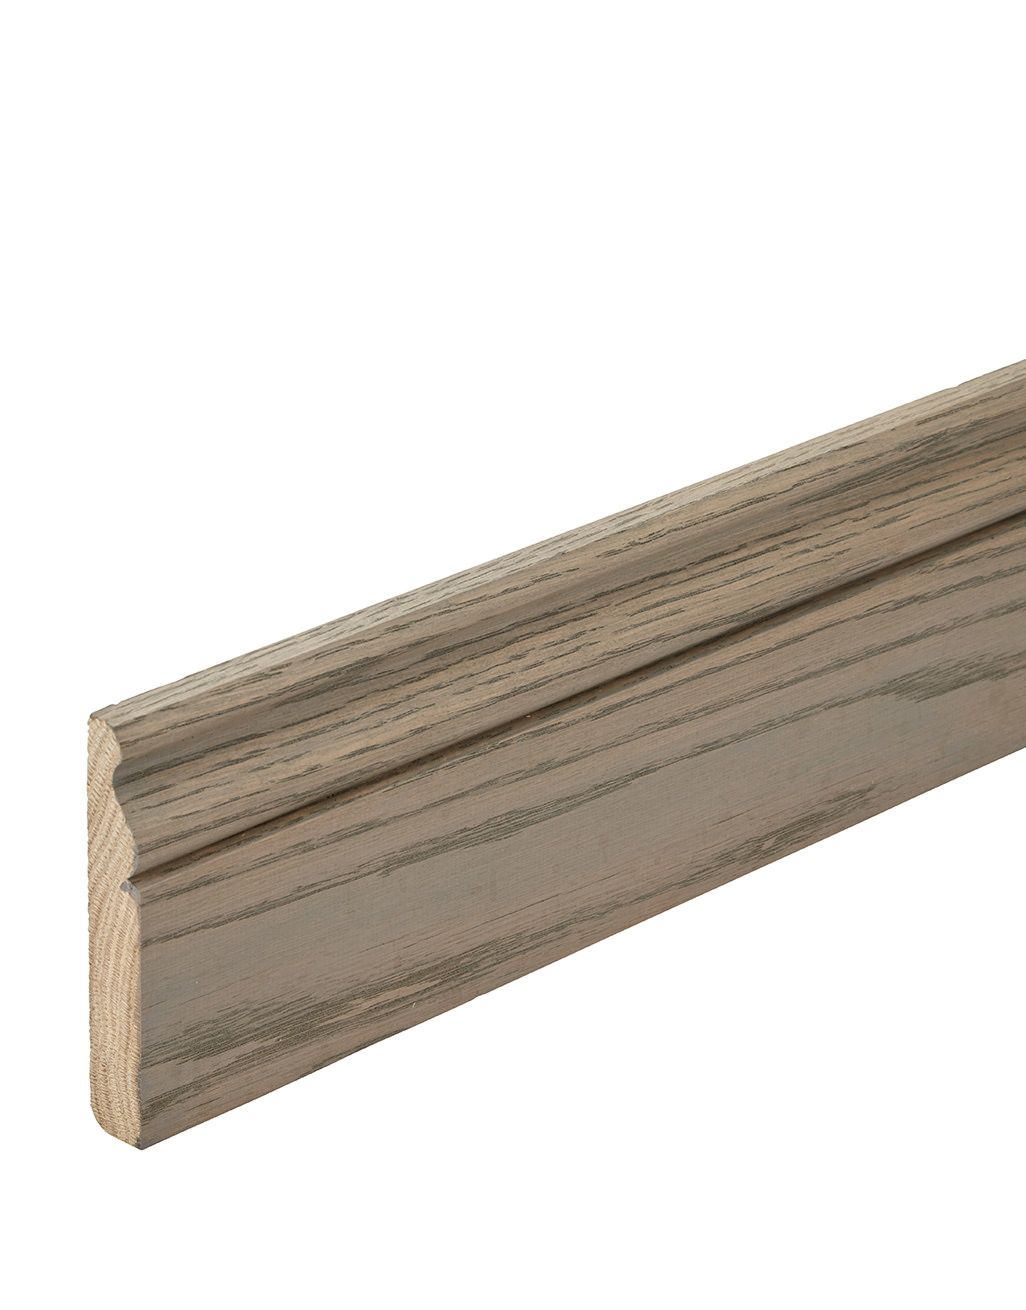 WS9 Solid Oak Skirting 4